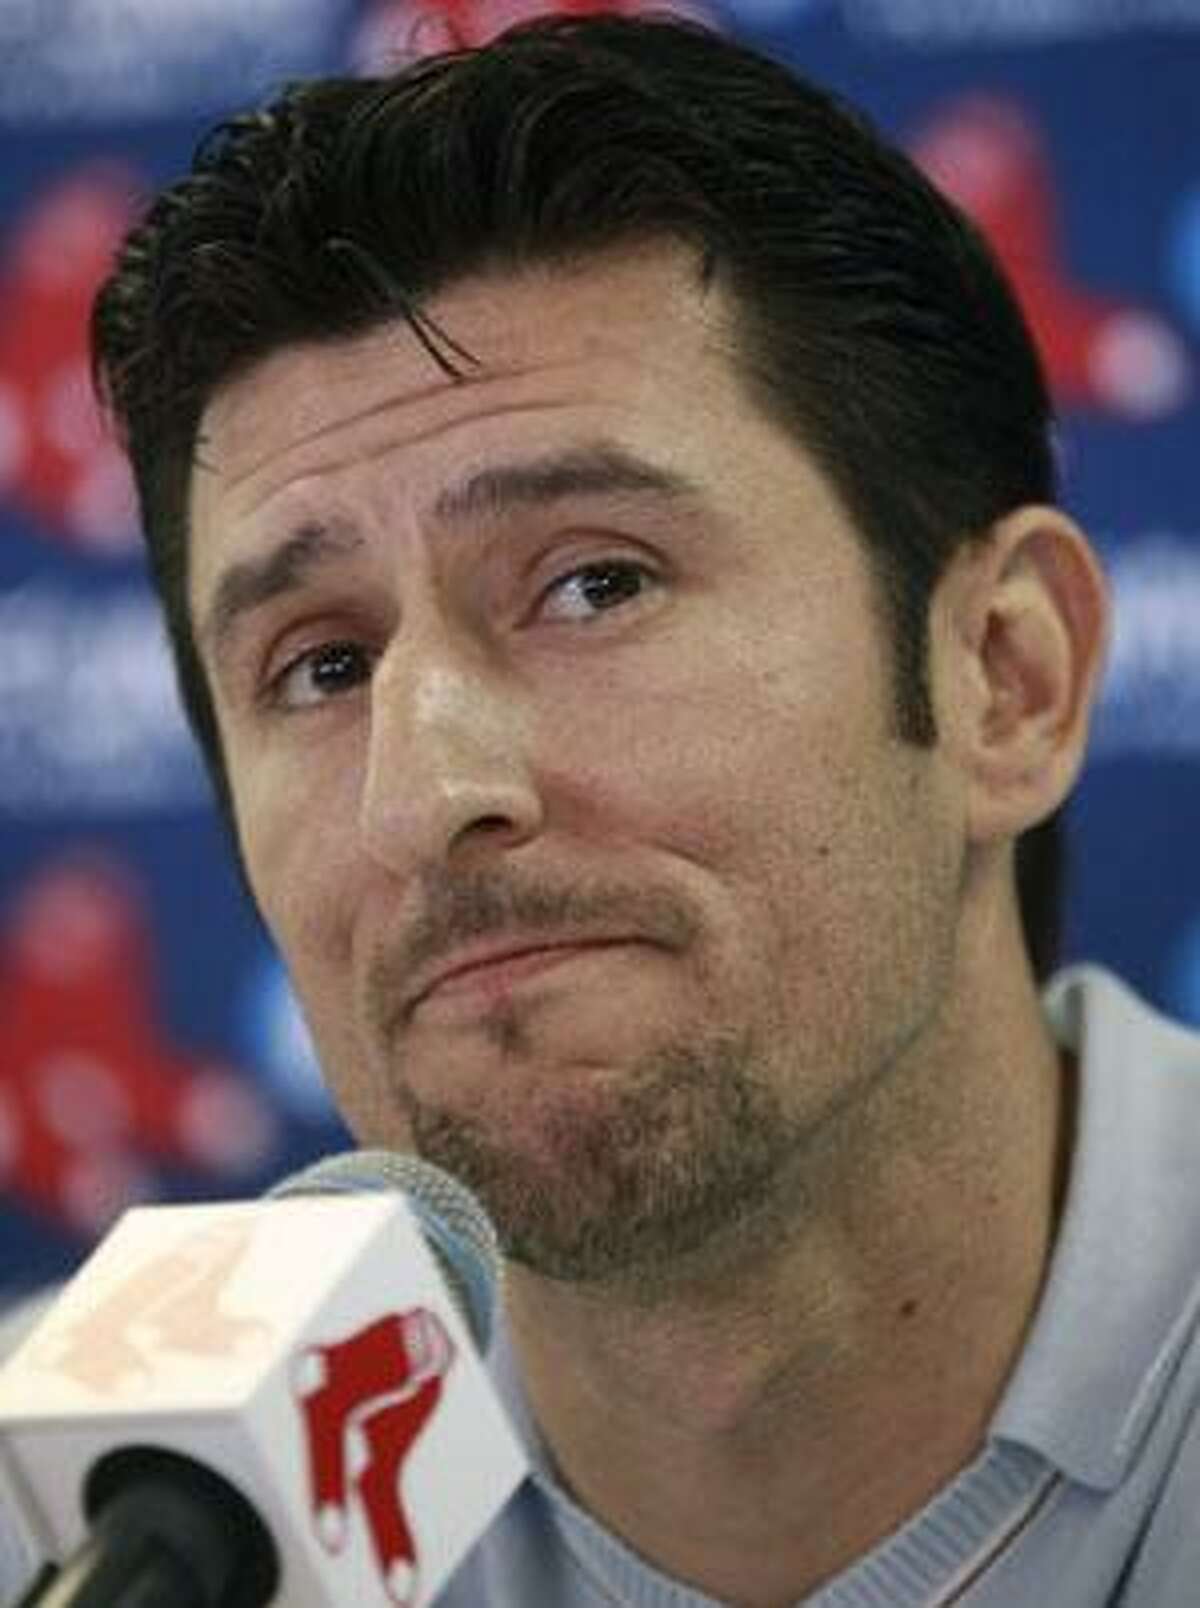 Garciaparra signs one-day contract with Red Sox, then retires